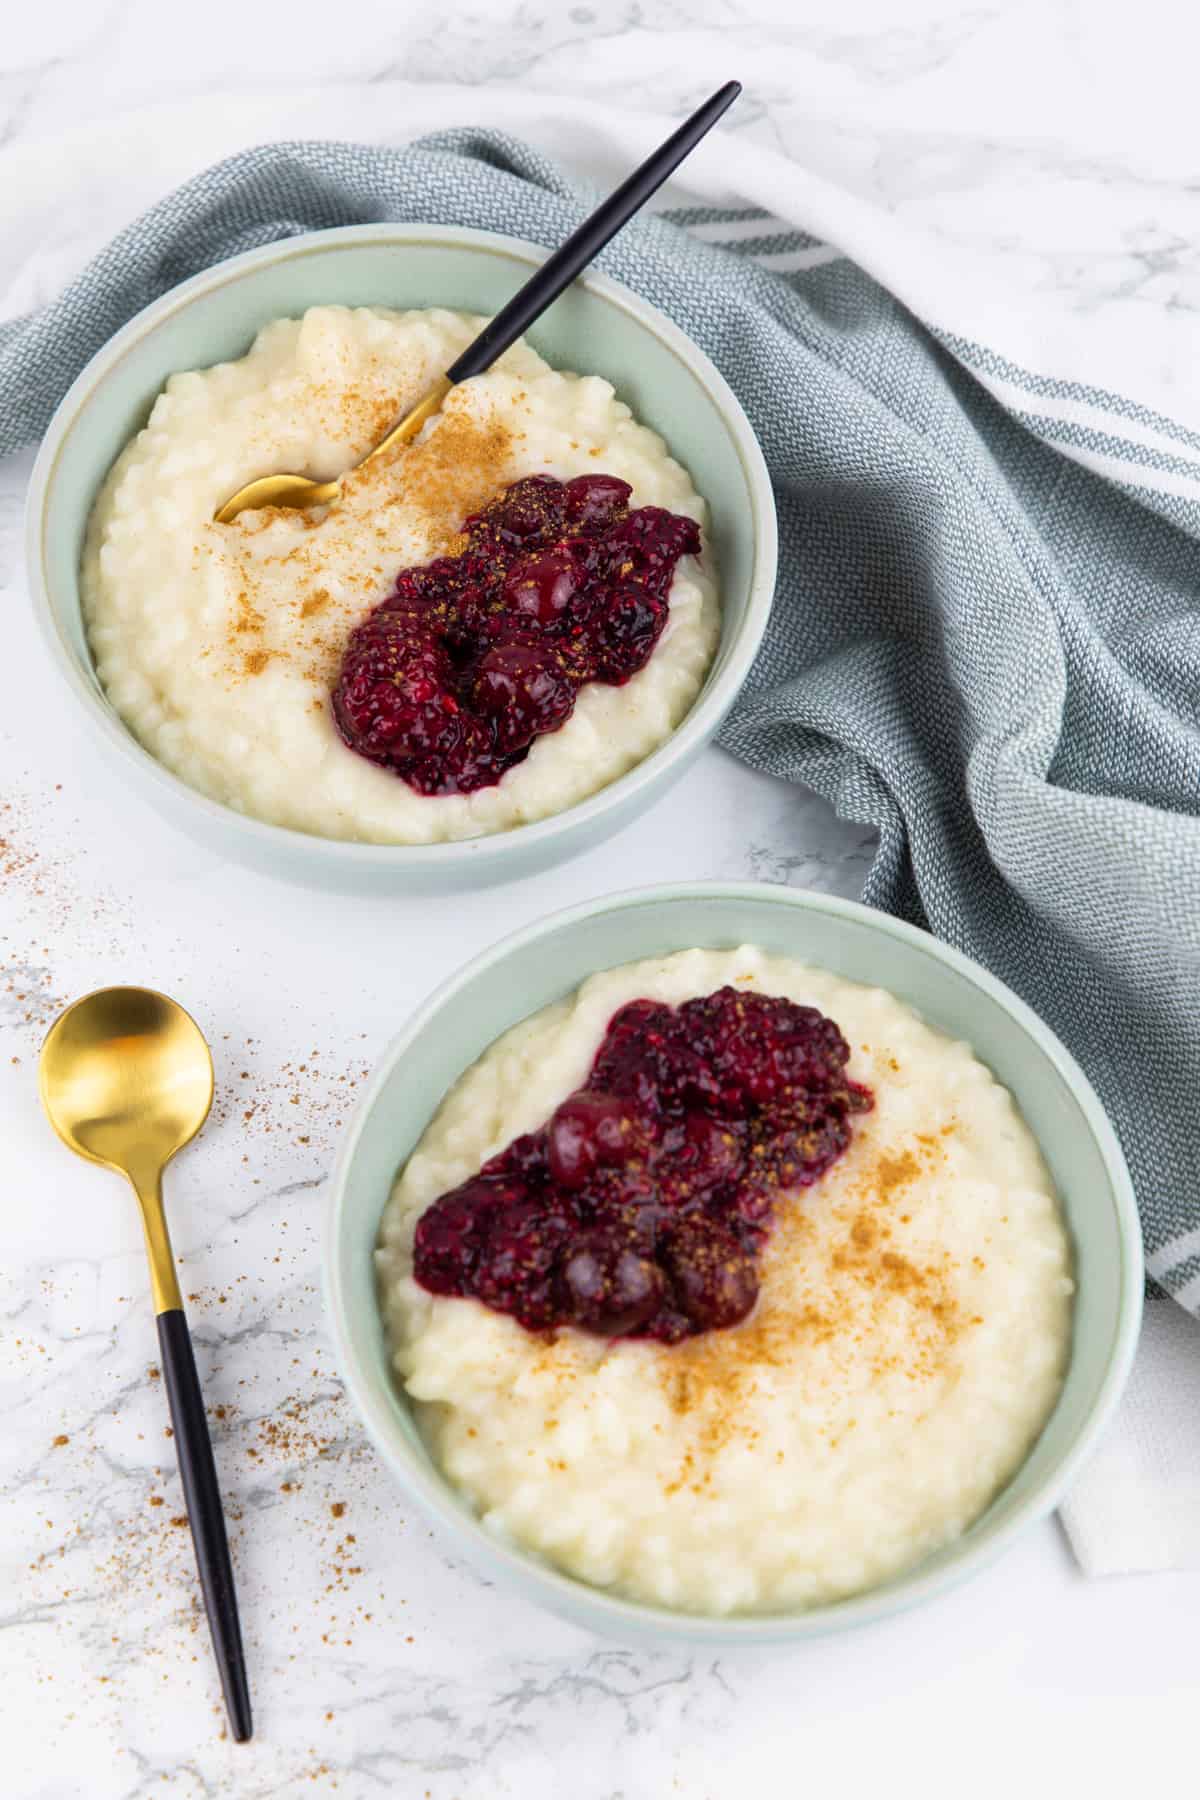 two bowls with rice pudding, cinnamon, and berries on a marble countertop 